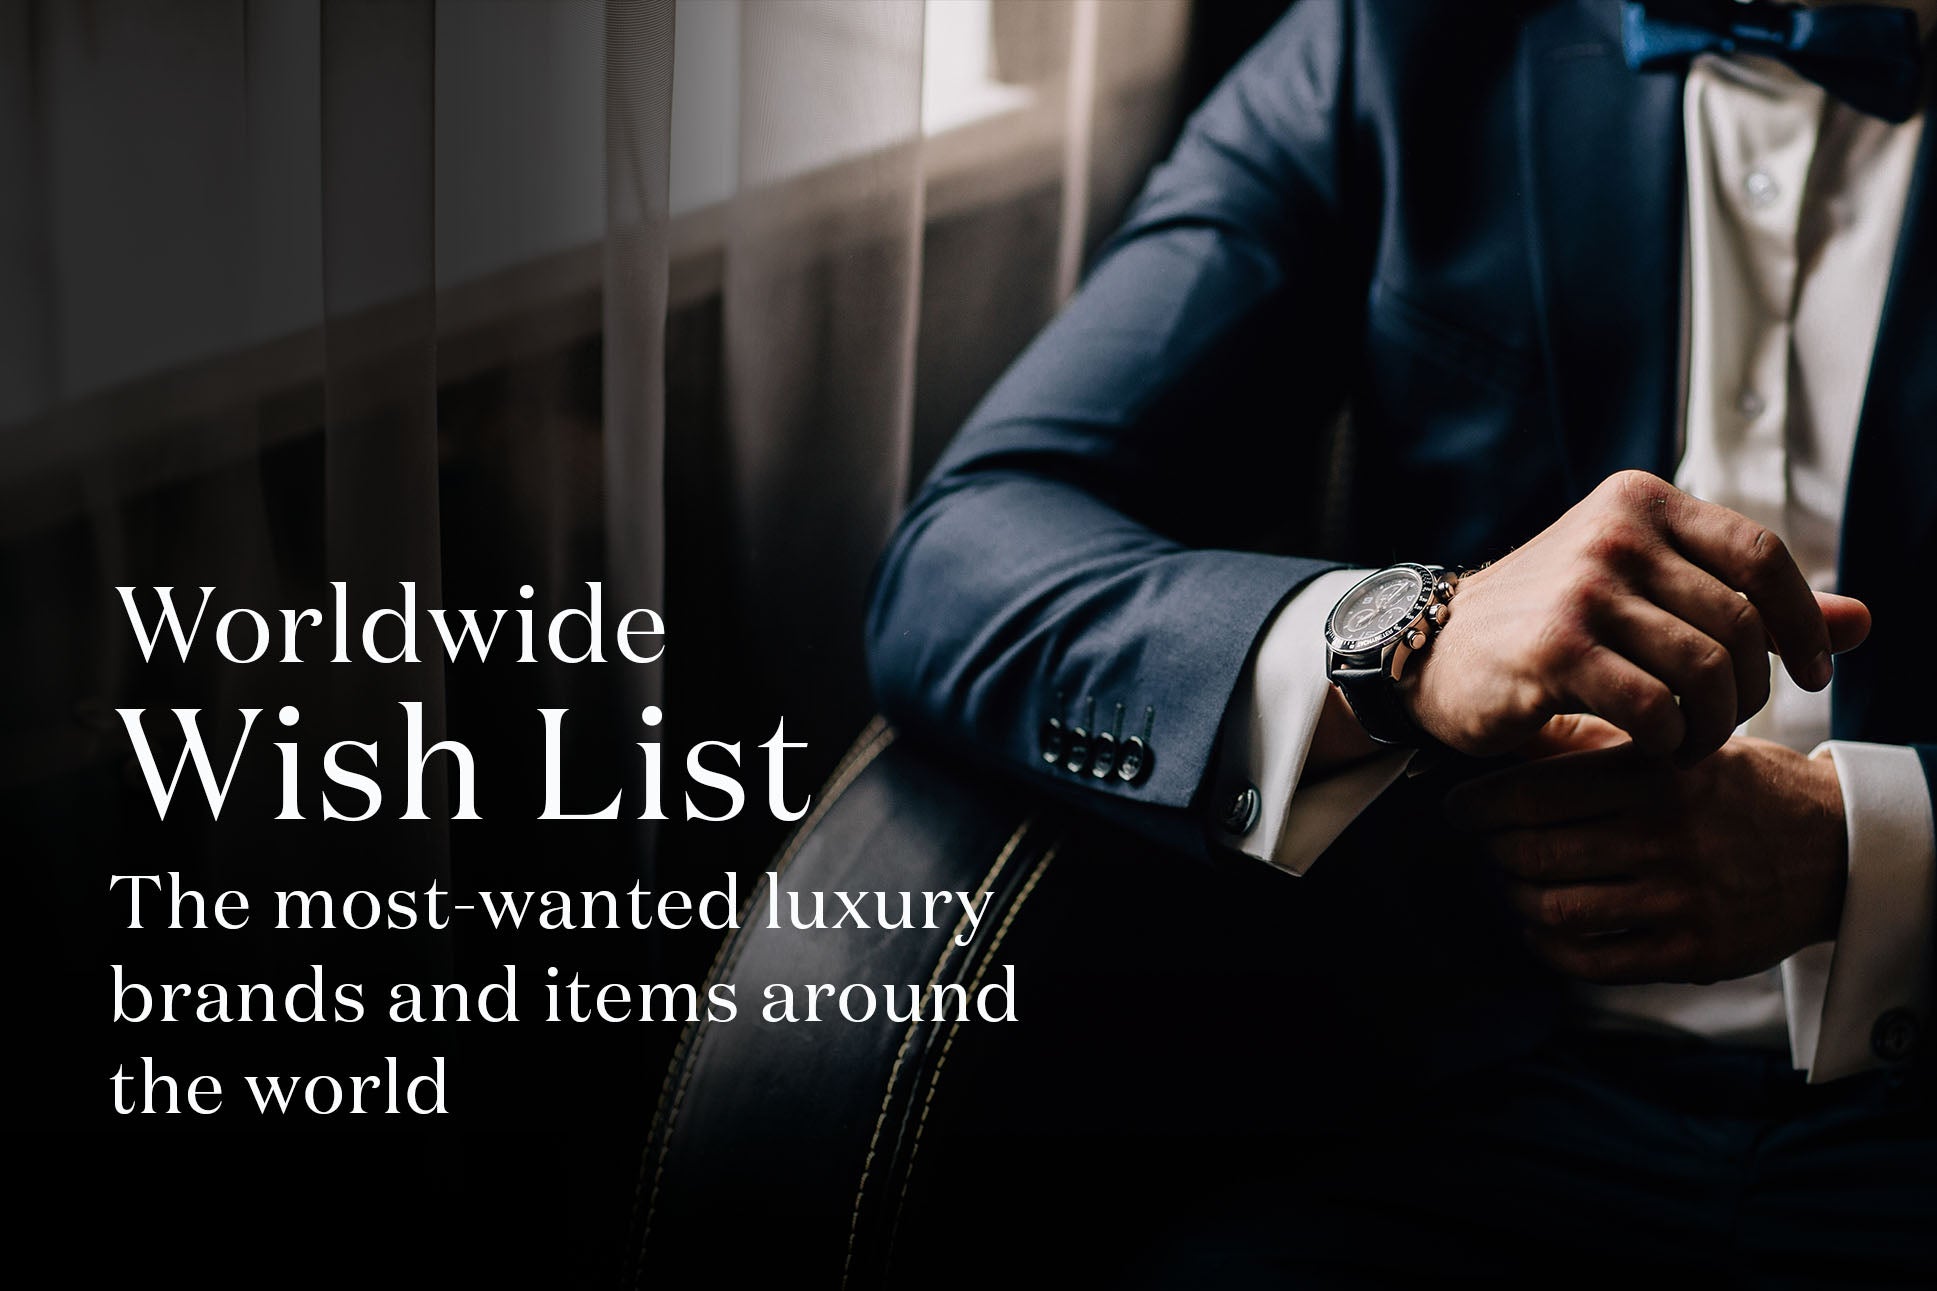 Worldwide Wish List - The Most-wanted Luxury Brands and Items Around the World